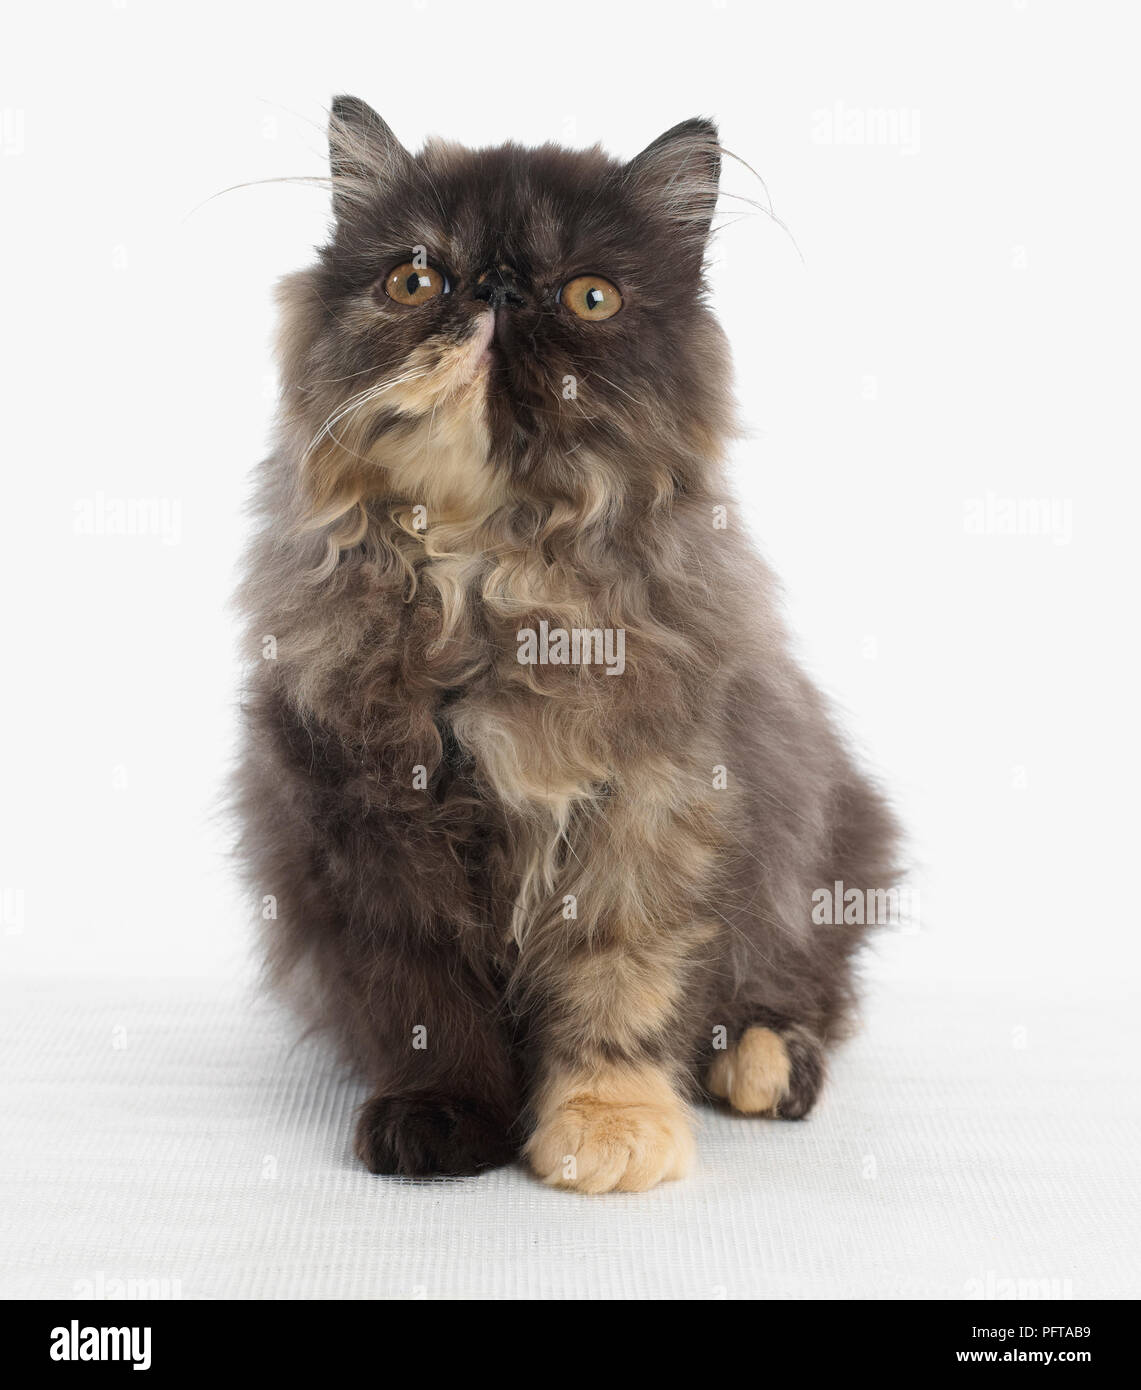 Brown longhair chaton, chaton persan, 20 semaines Banque D'Images